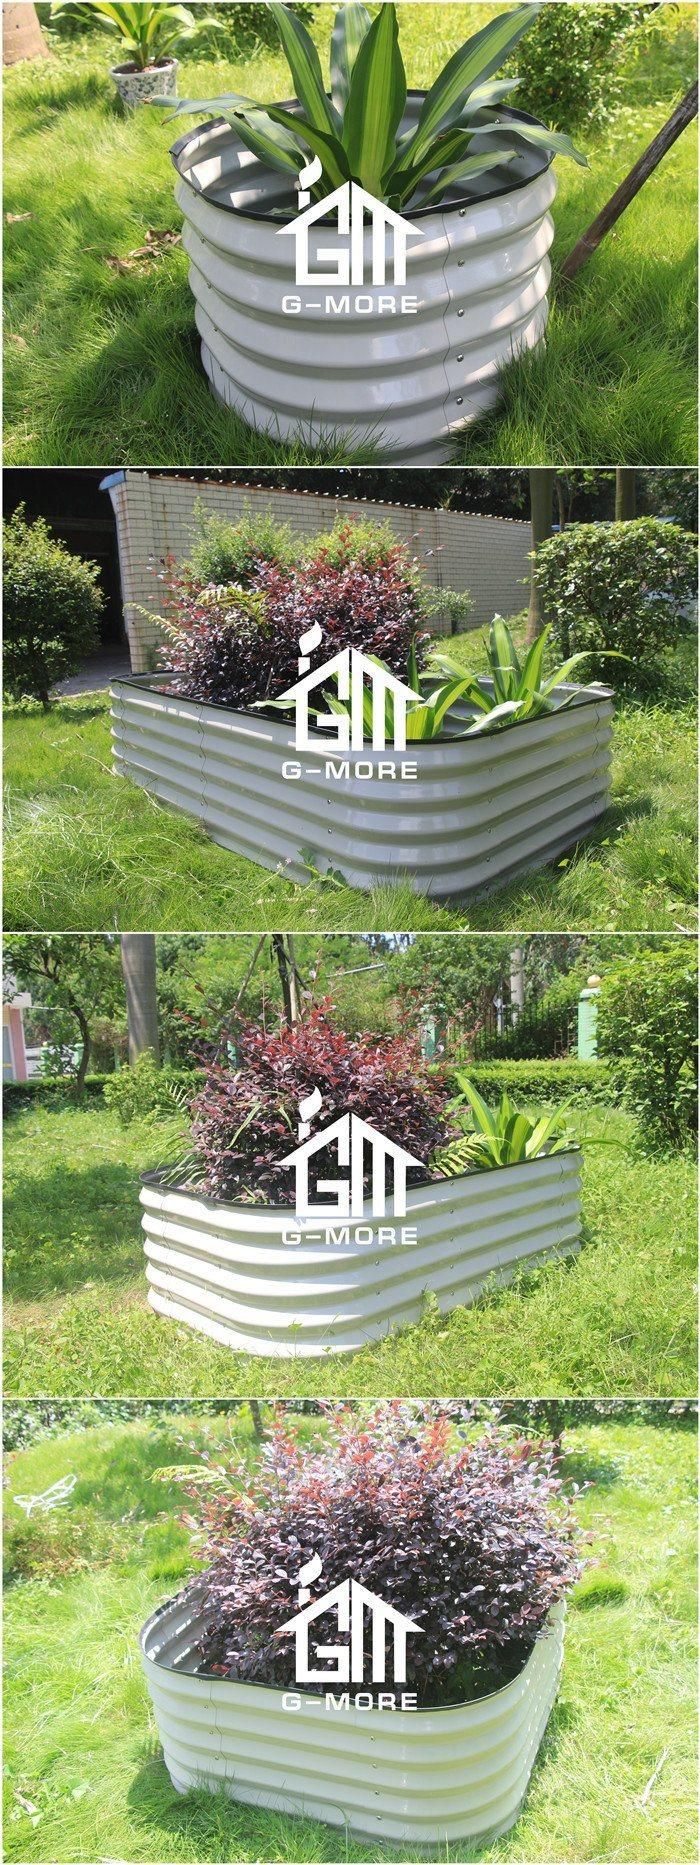 Arch Powder Coated Galvanized Planter for Growing Herbs Flowers Raised Garden Beds